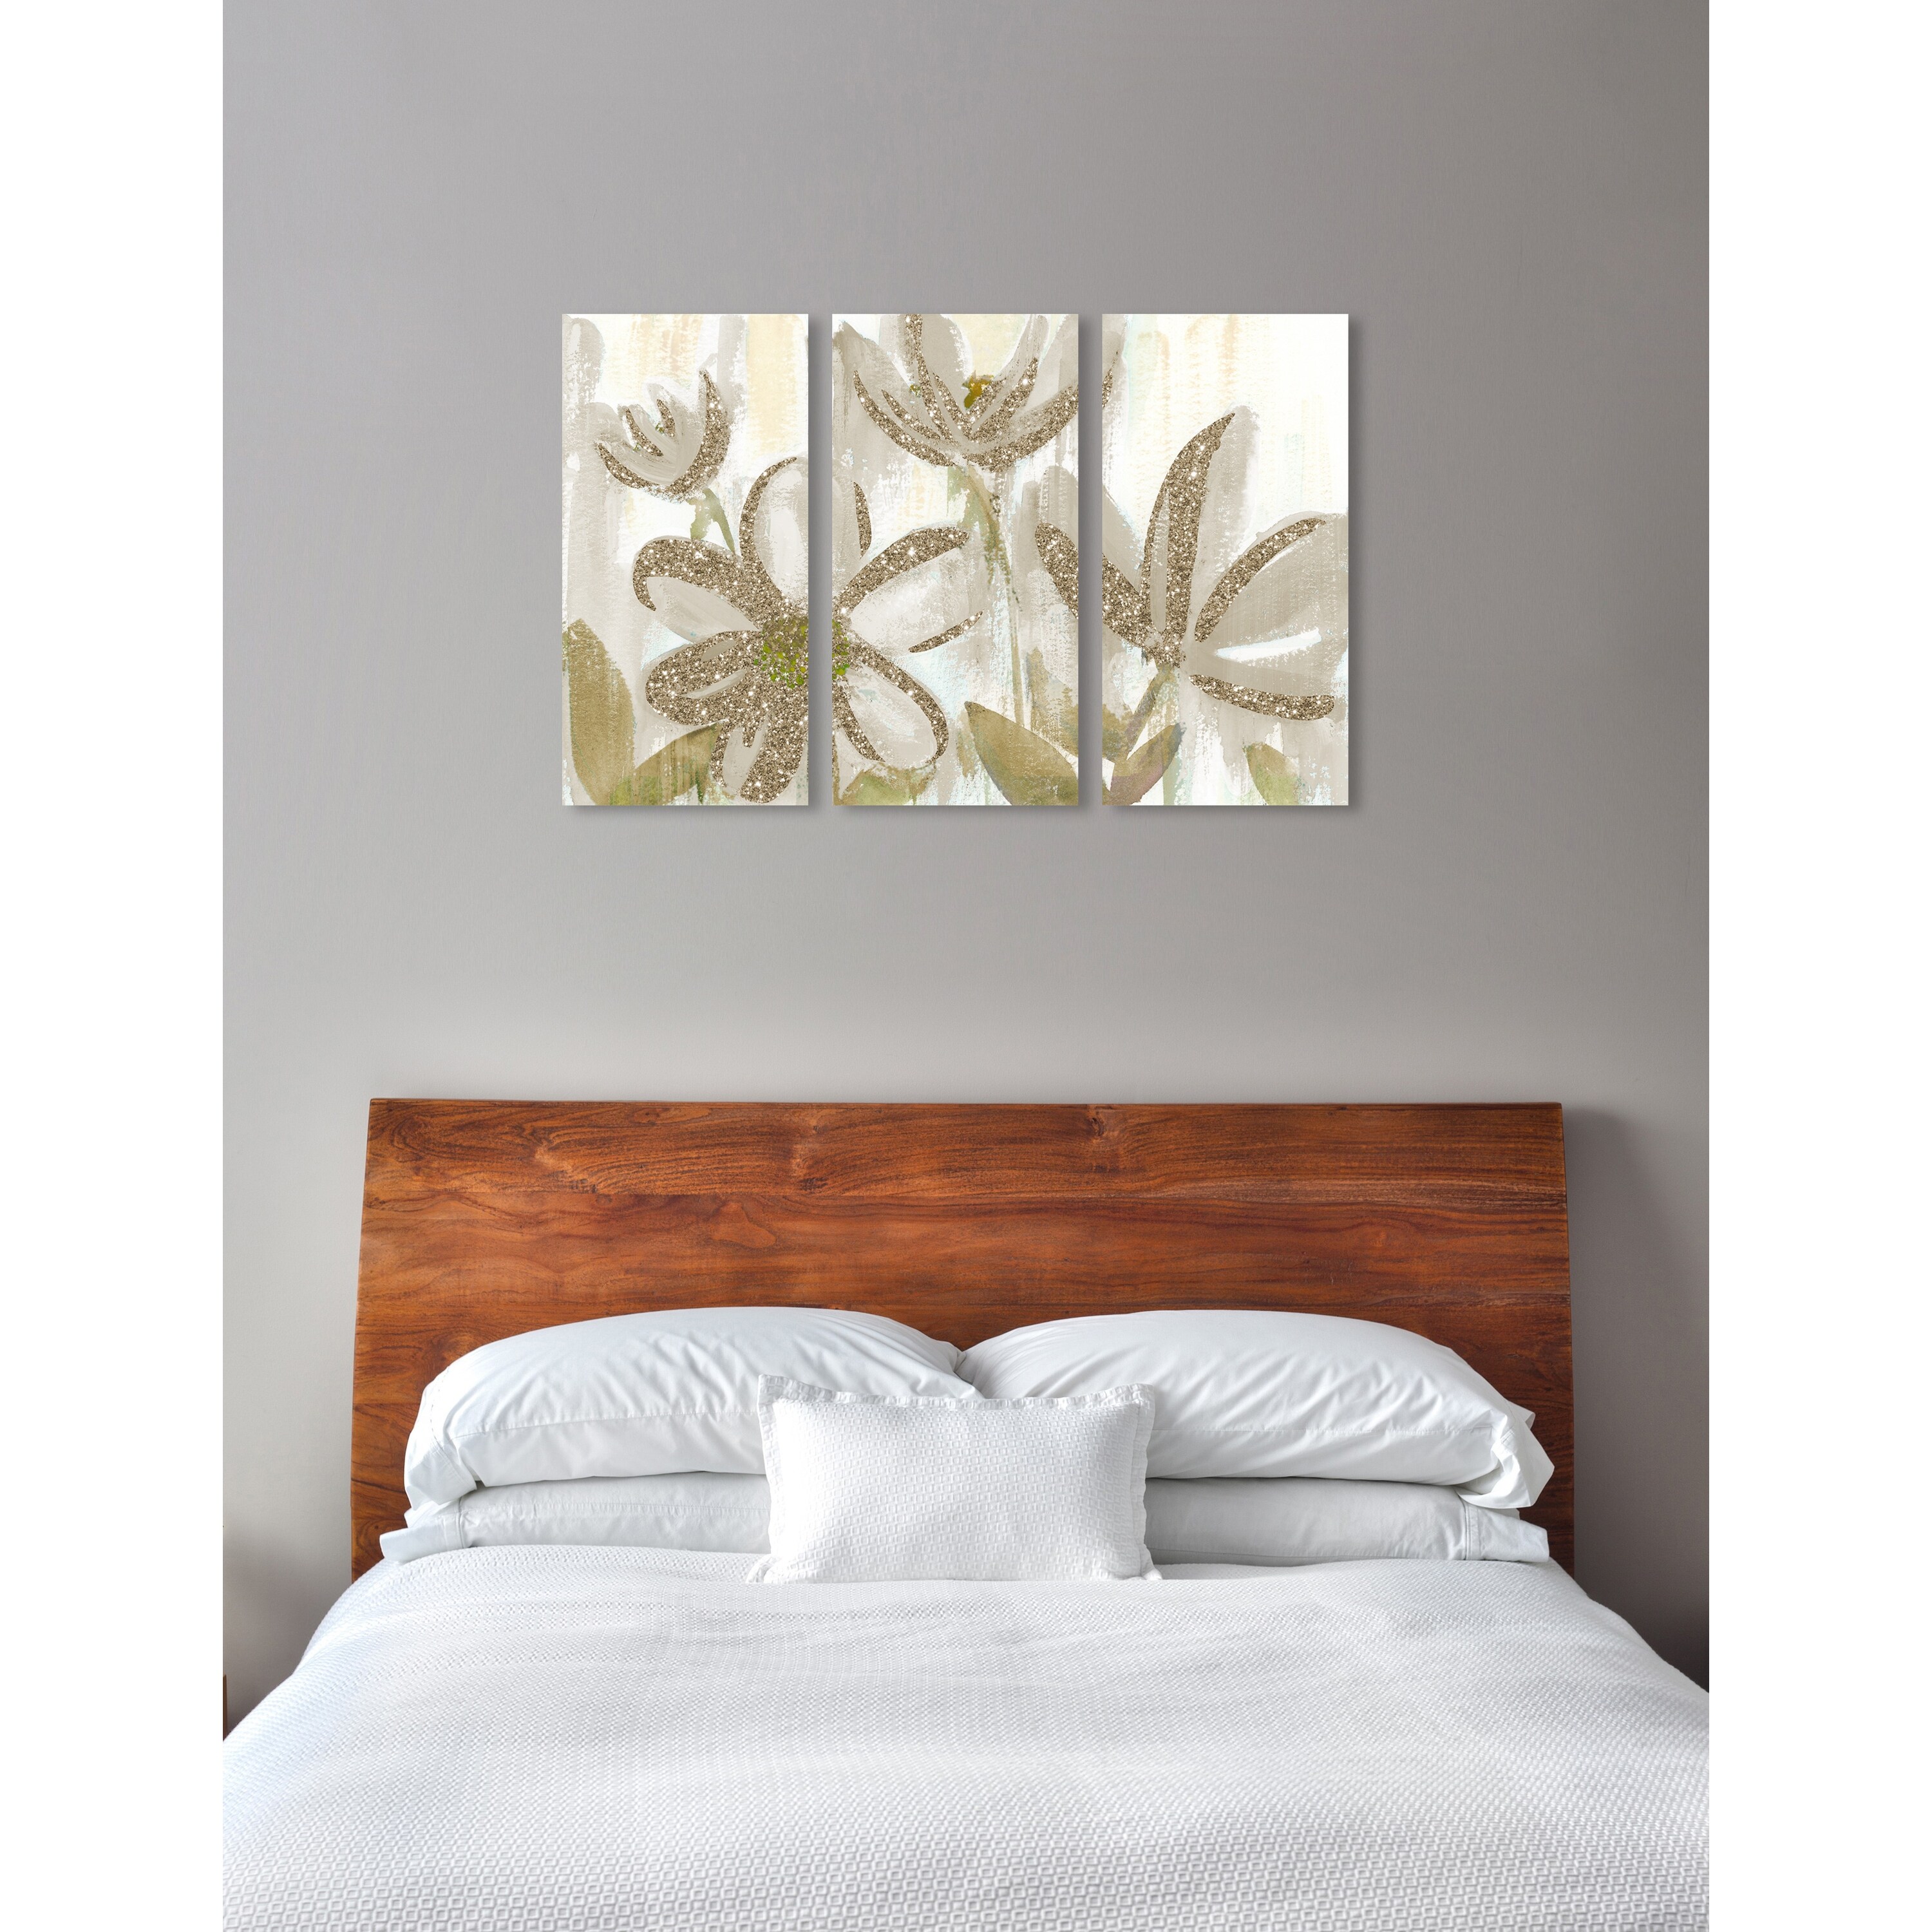 Oliver Gal LV Garden 16 Square Canvas Wall Art - Style #23J33